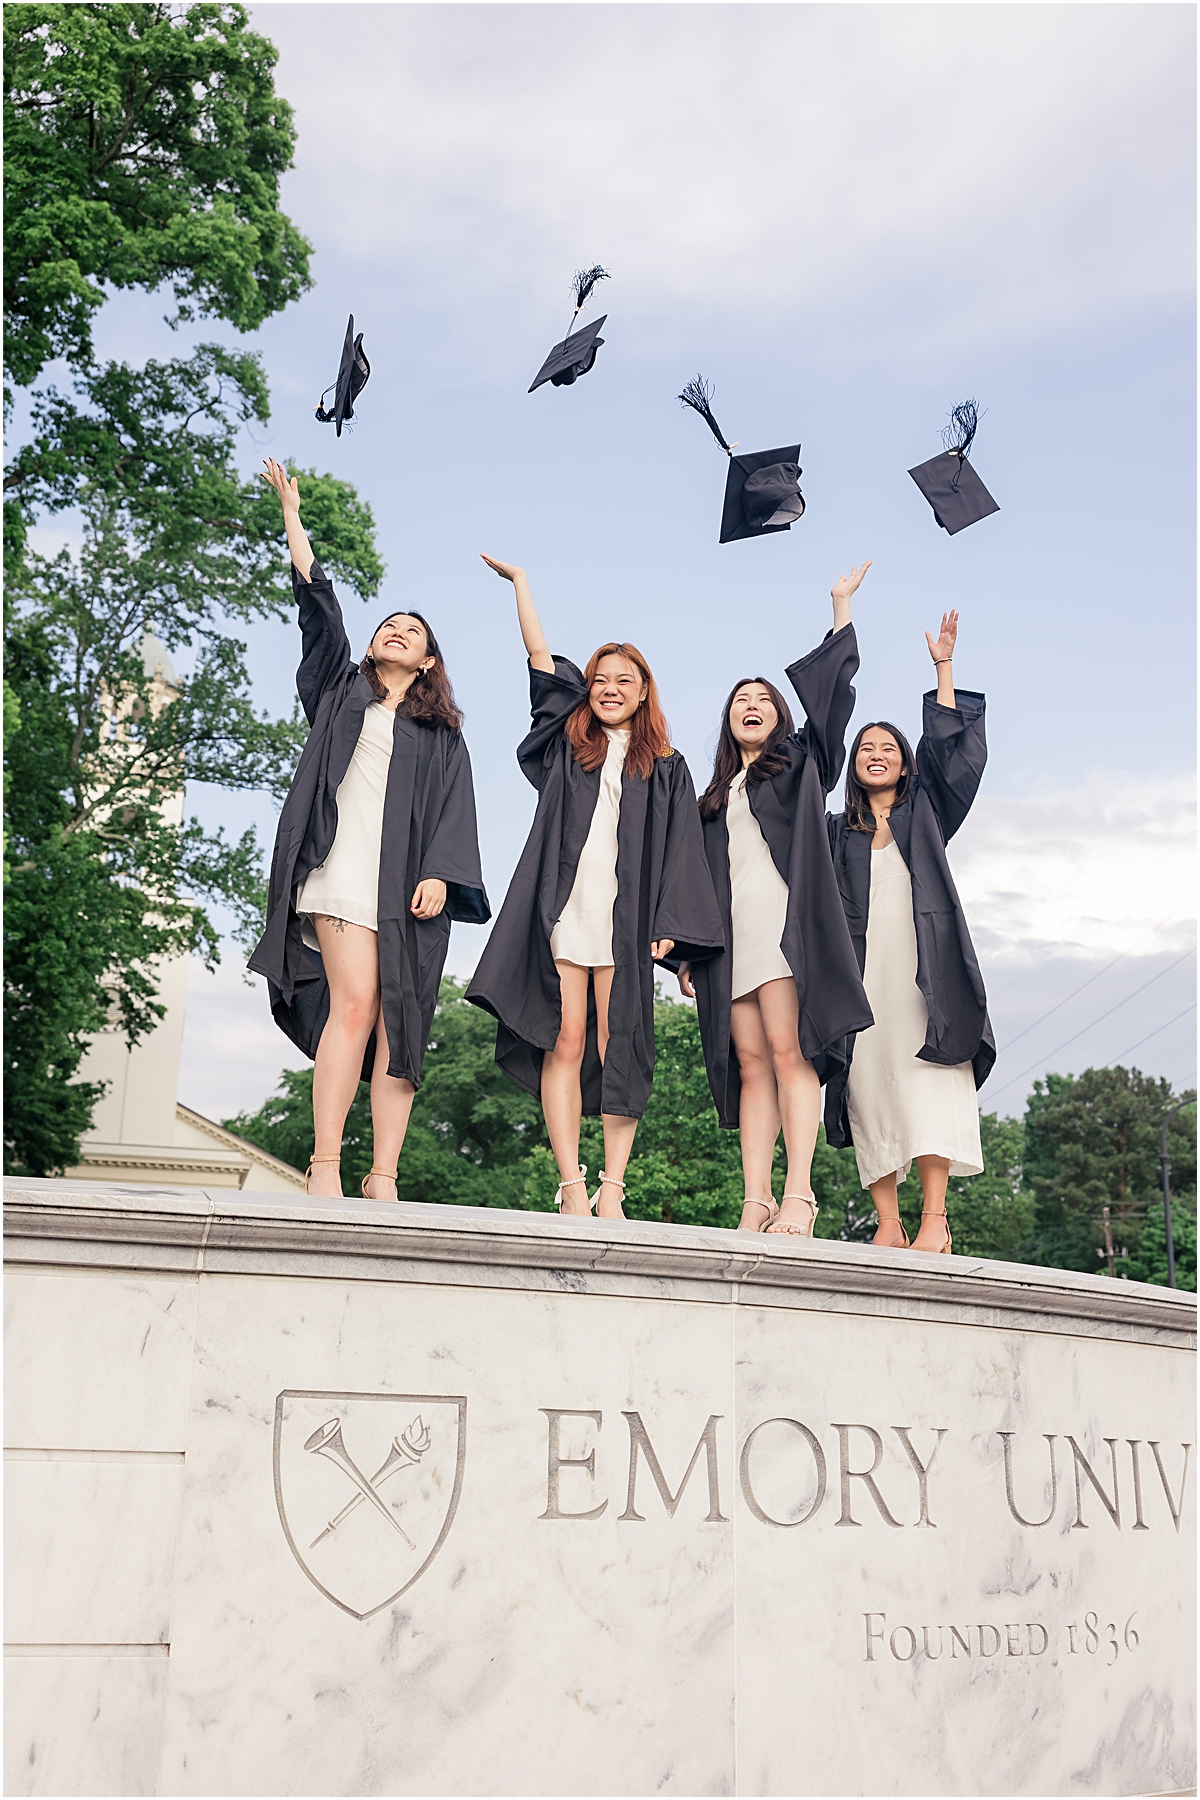 4 female graduates wearing coordinating white dresses and their black graduation gowns and throwing their graduation caps in the air